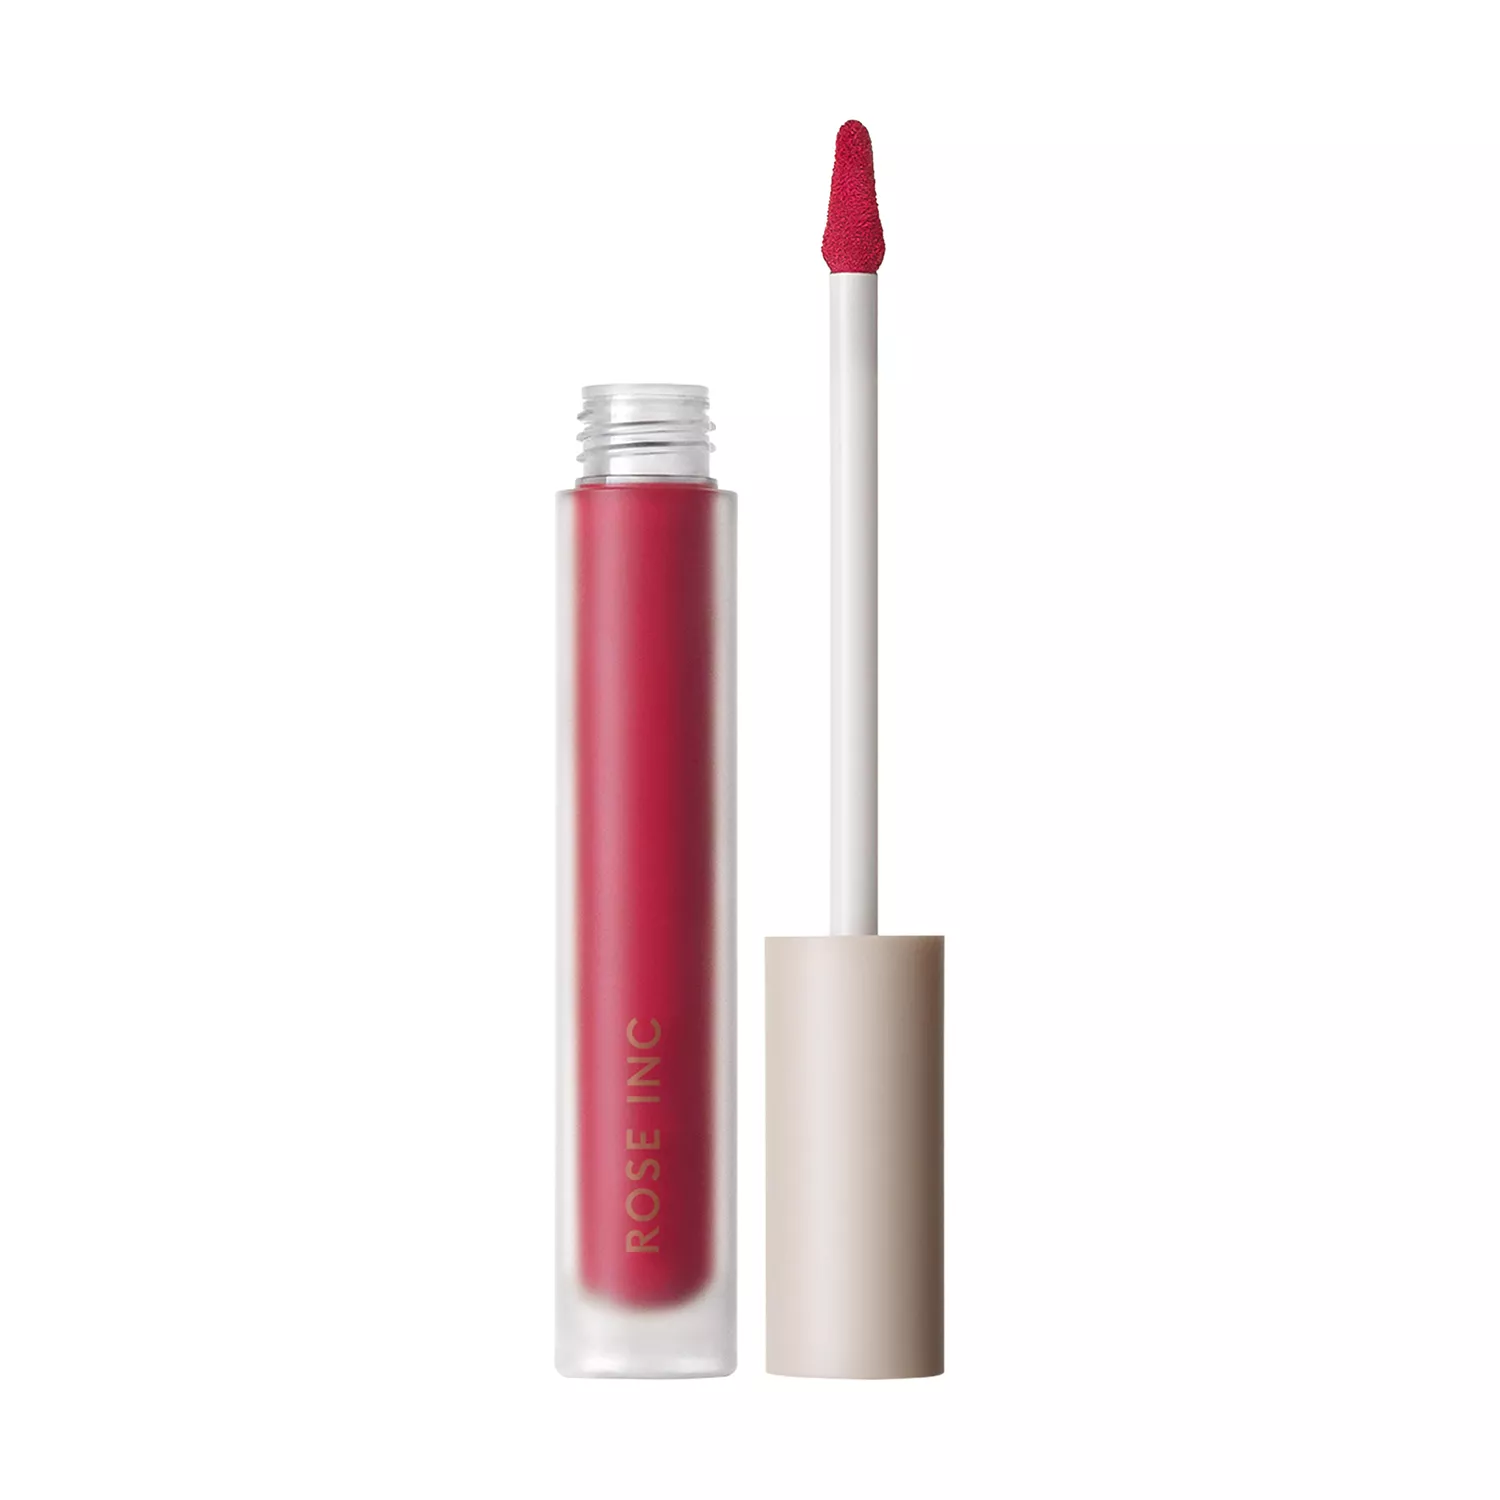 Rose Inc Lip Cream Weightless Matte Color in Of Stars cool pink